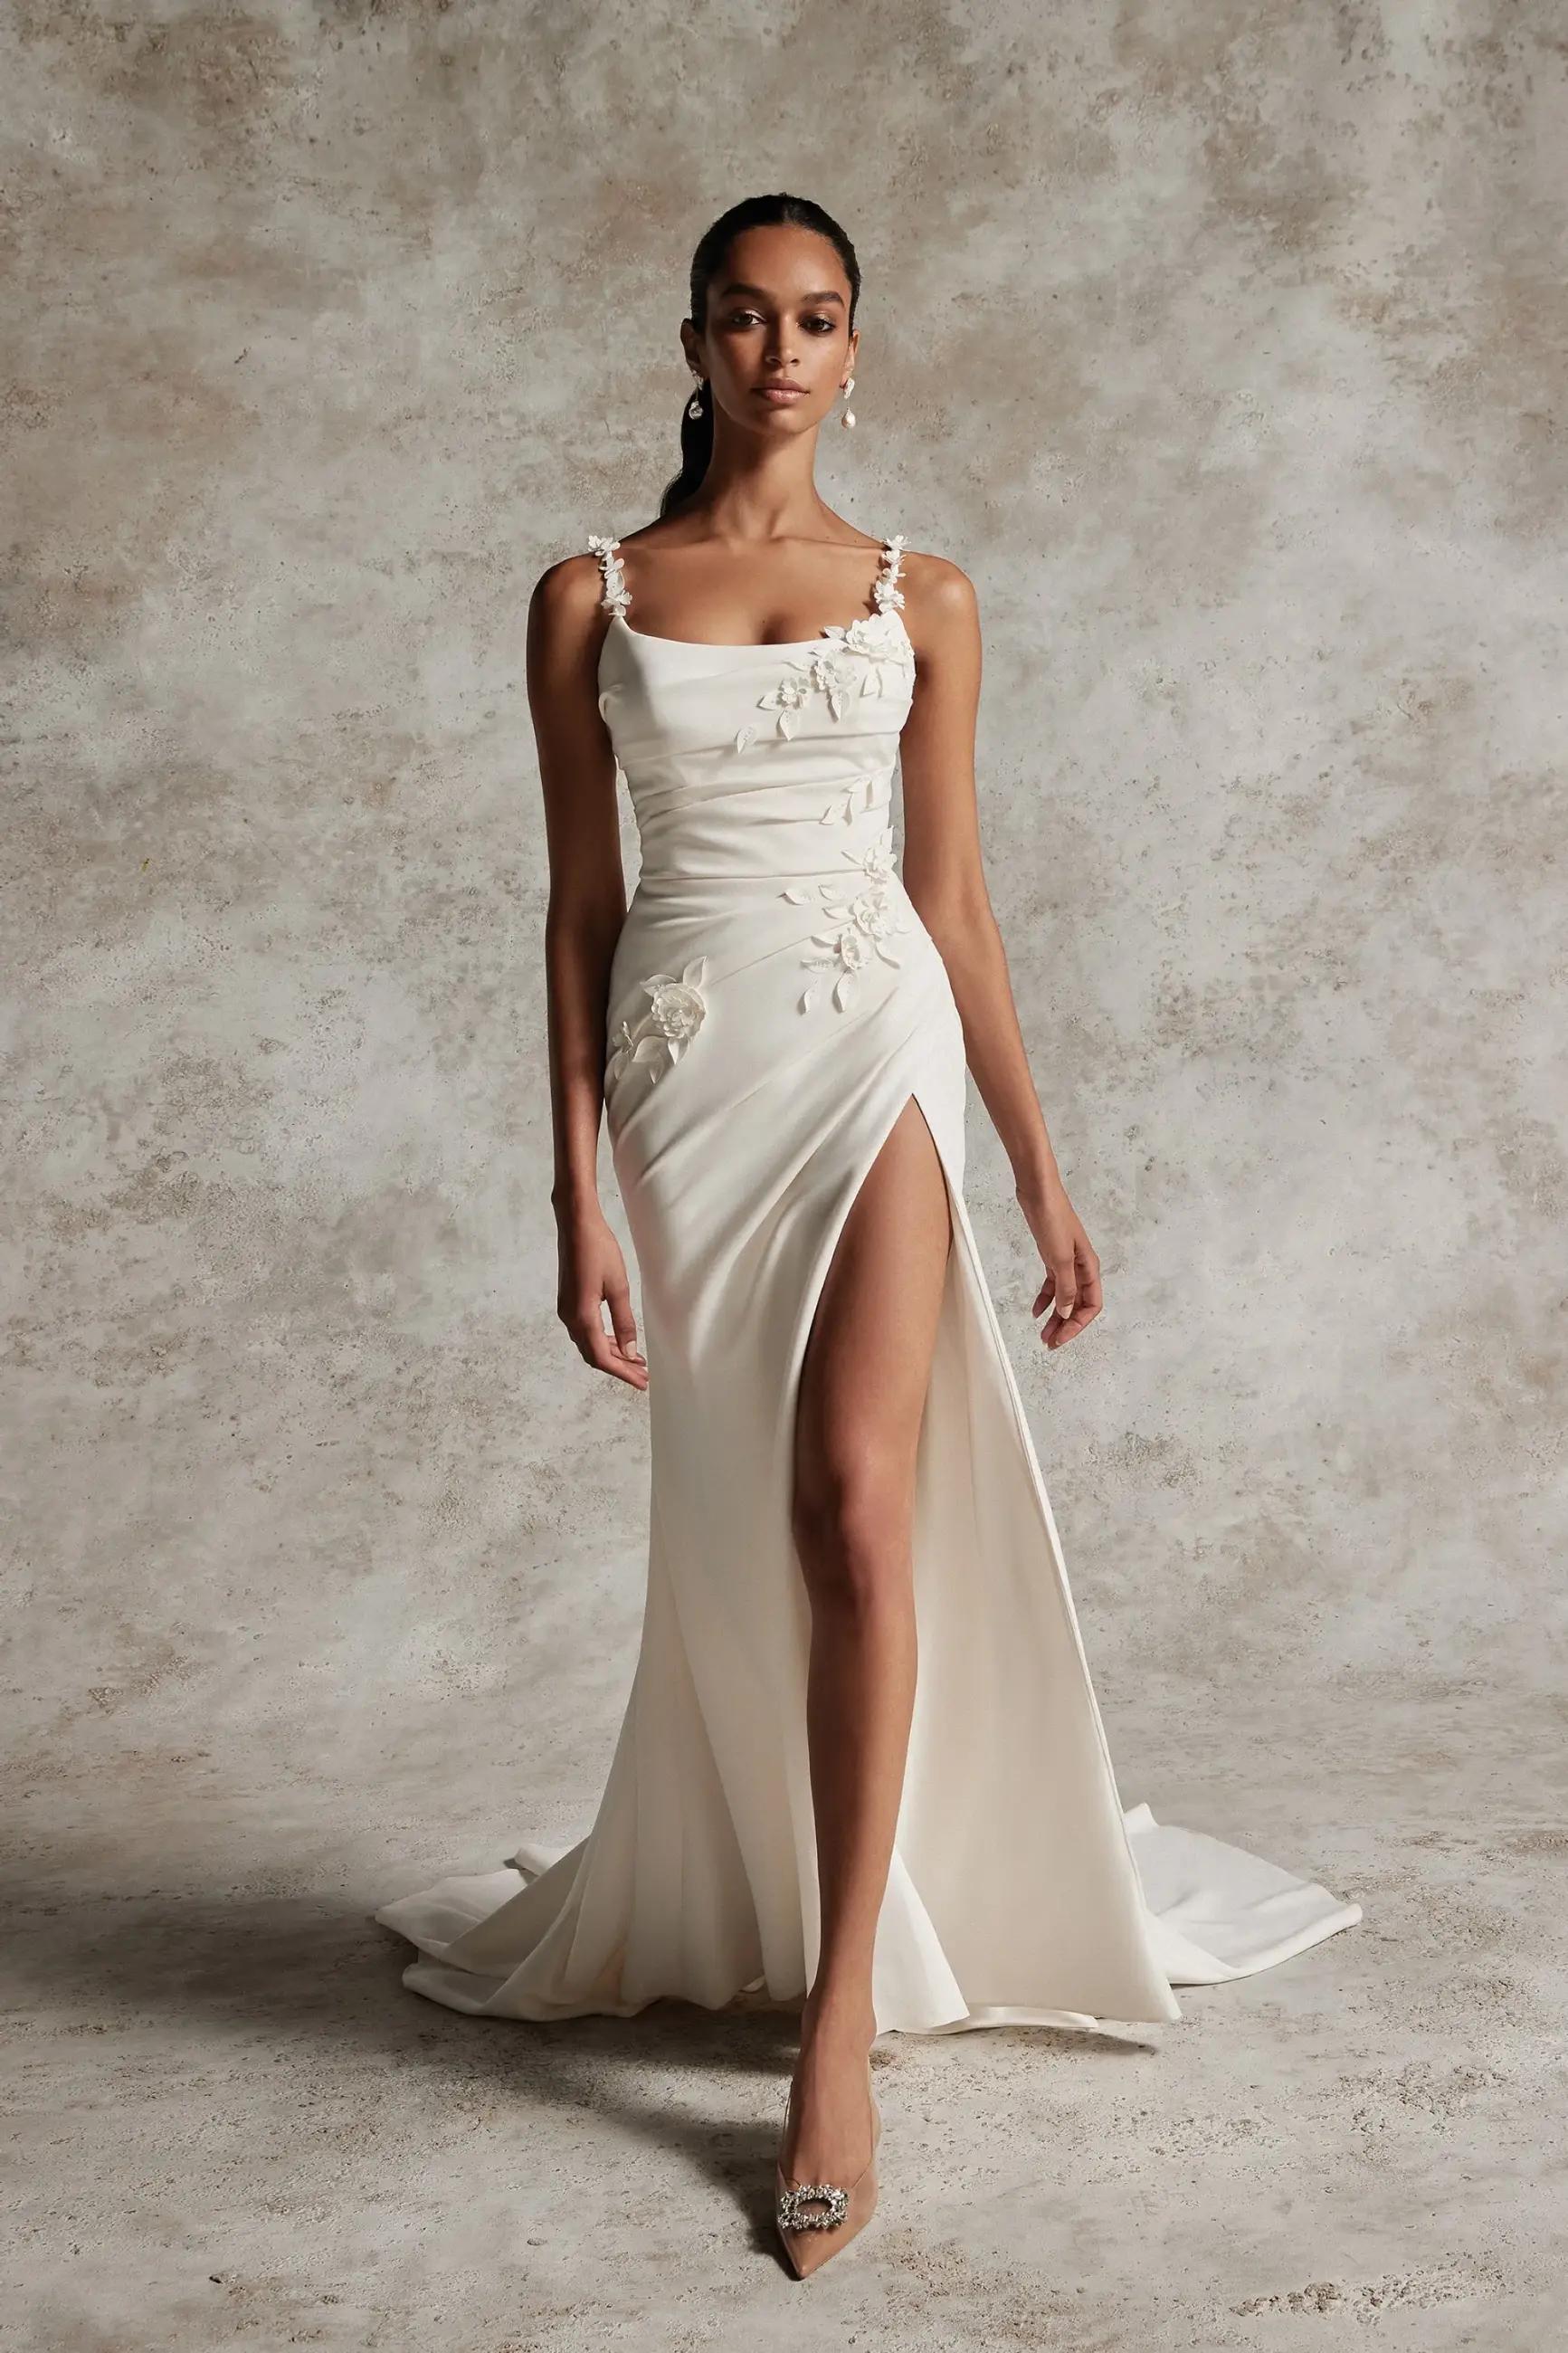 Contemporary Twist on Fit and Flare Wedding Gown Designs Image